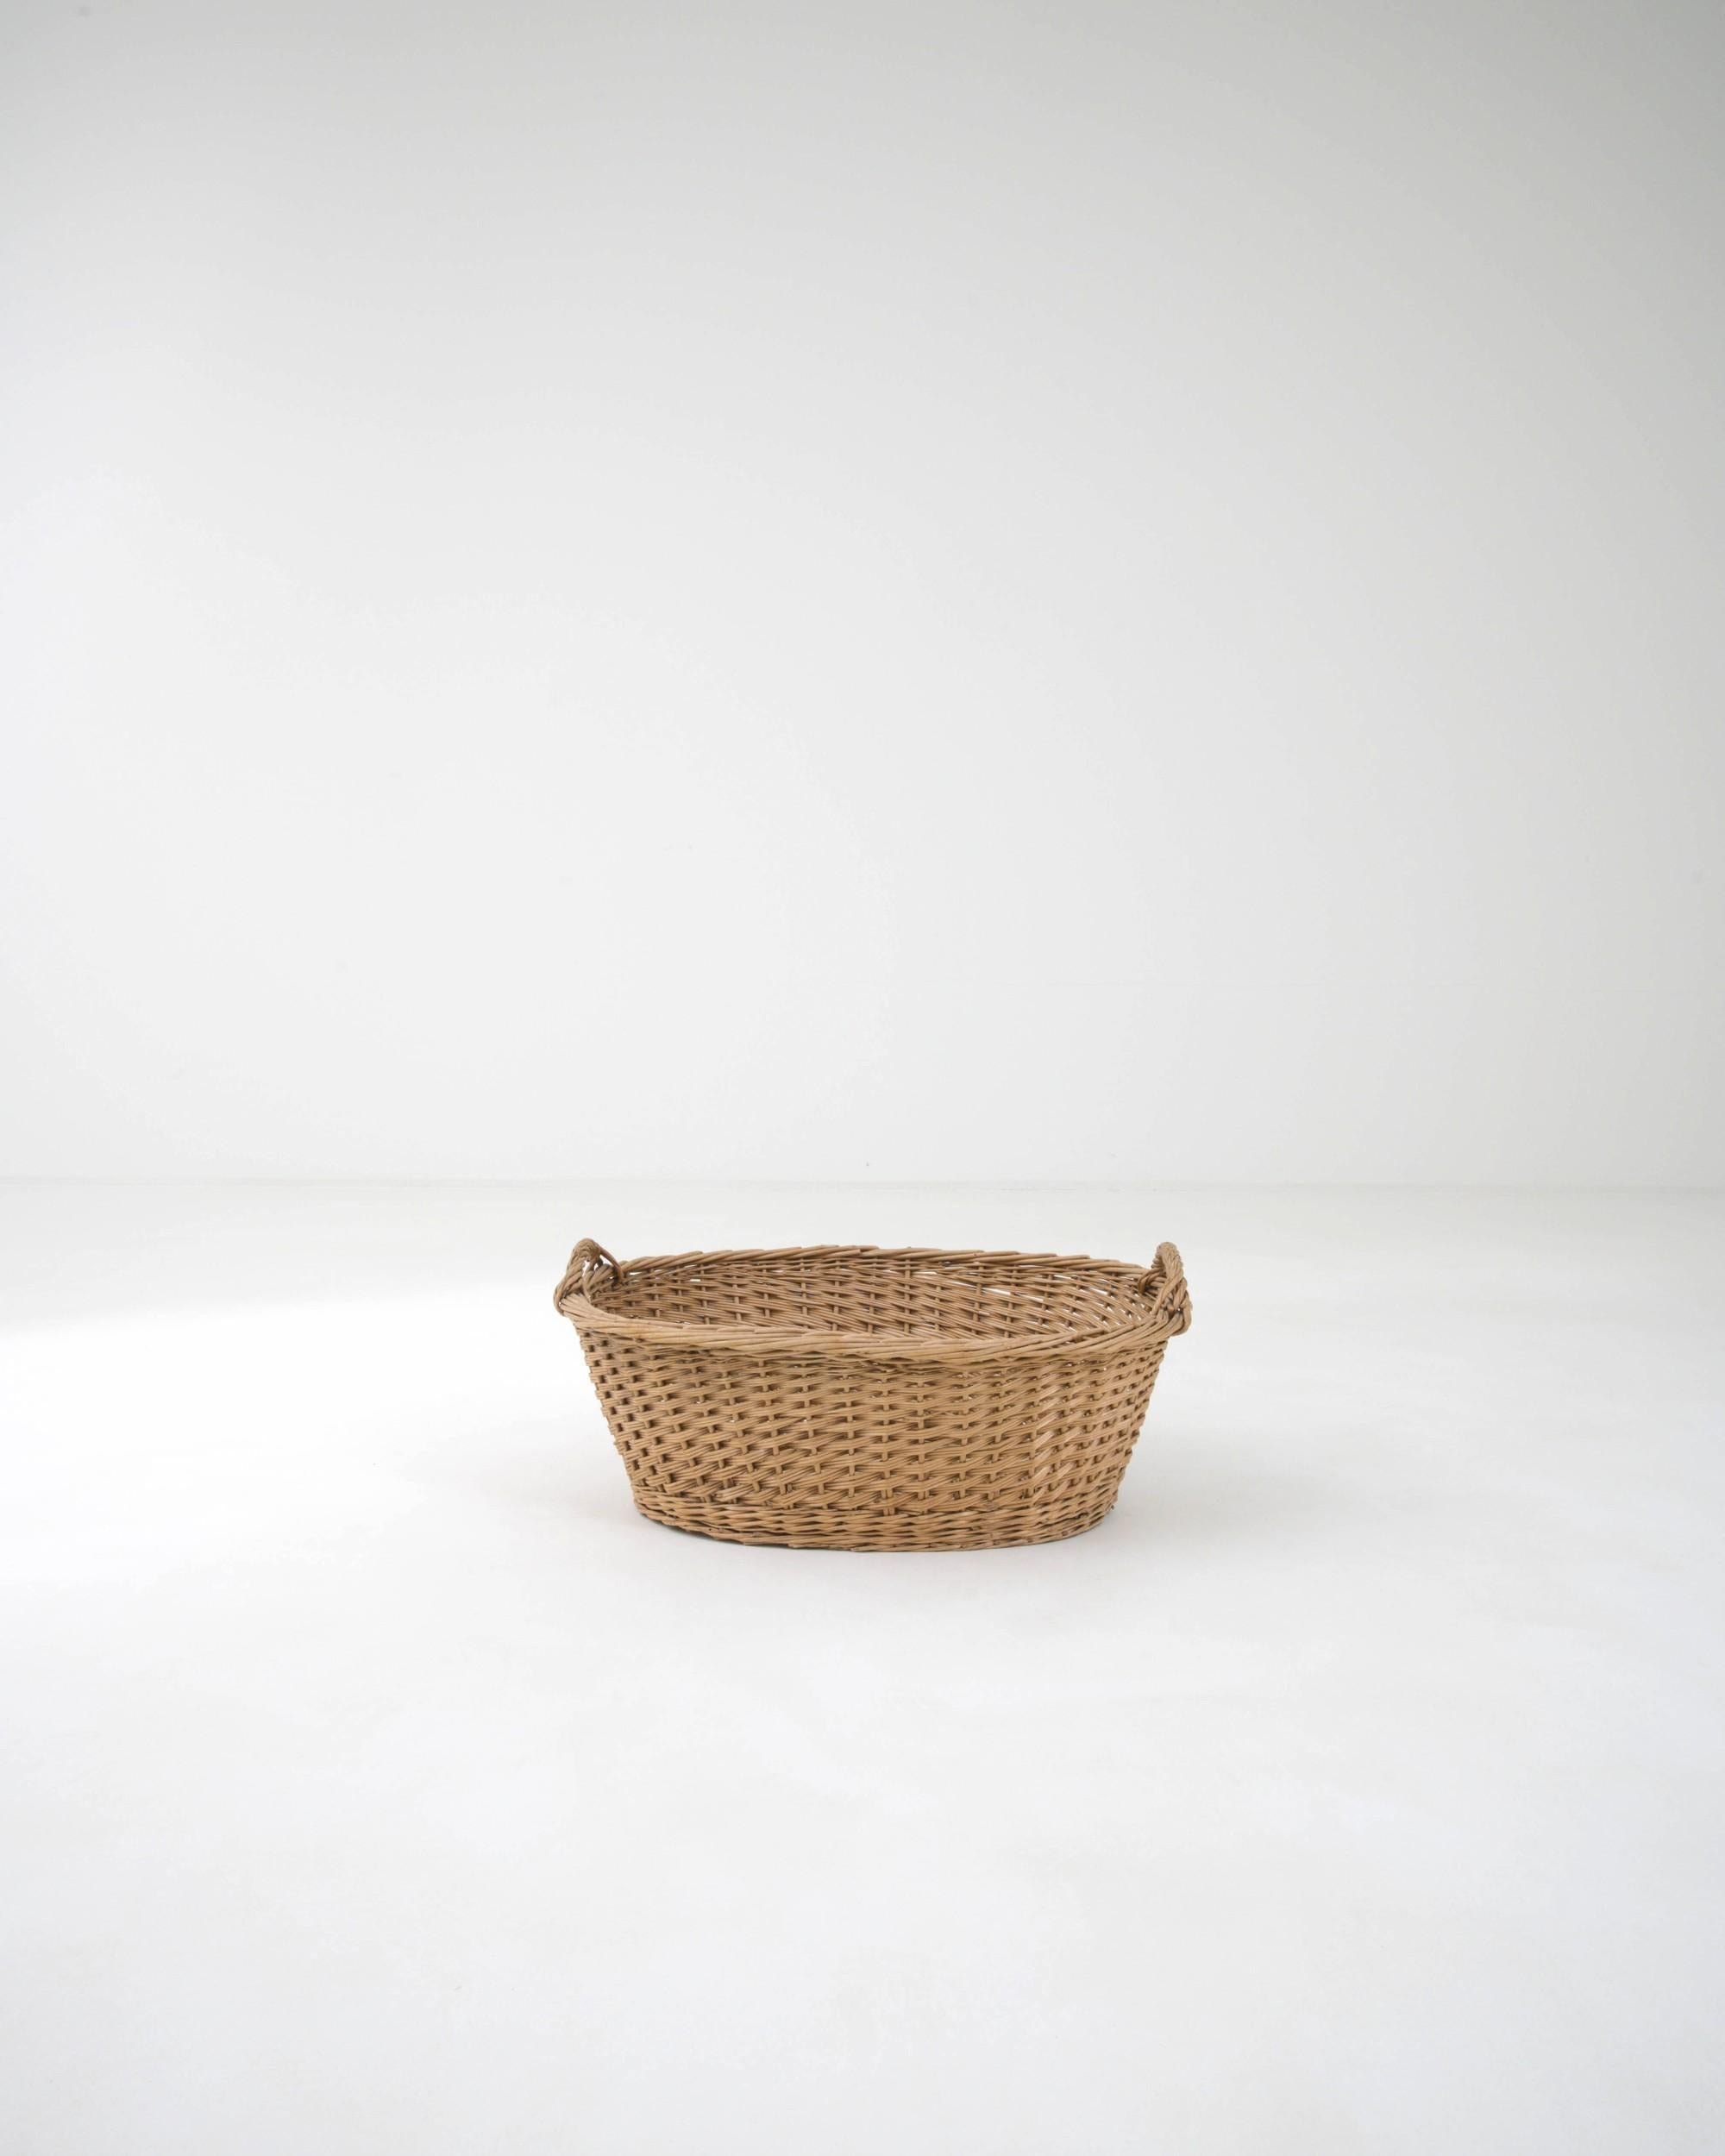 This Provincial wicker basket evokes the rustic simplicity of a bygone age. Made in France in the 20th century, this piece was once likely used for fruit-picking; the form evokes the abundance of the orchard and the golden warmth of summer’s end.